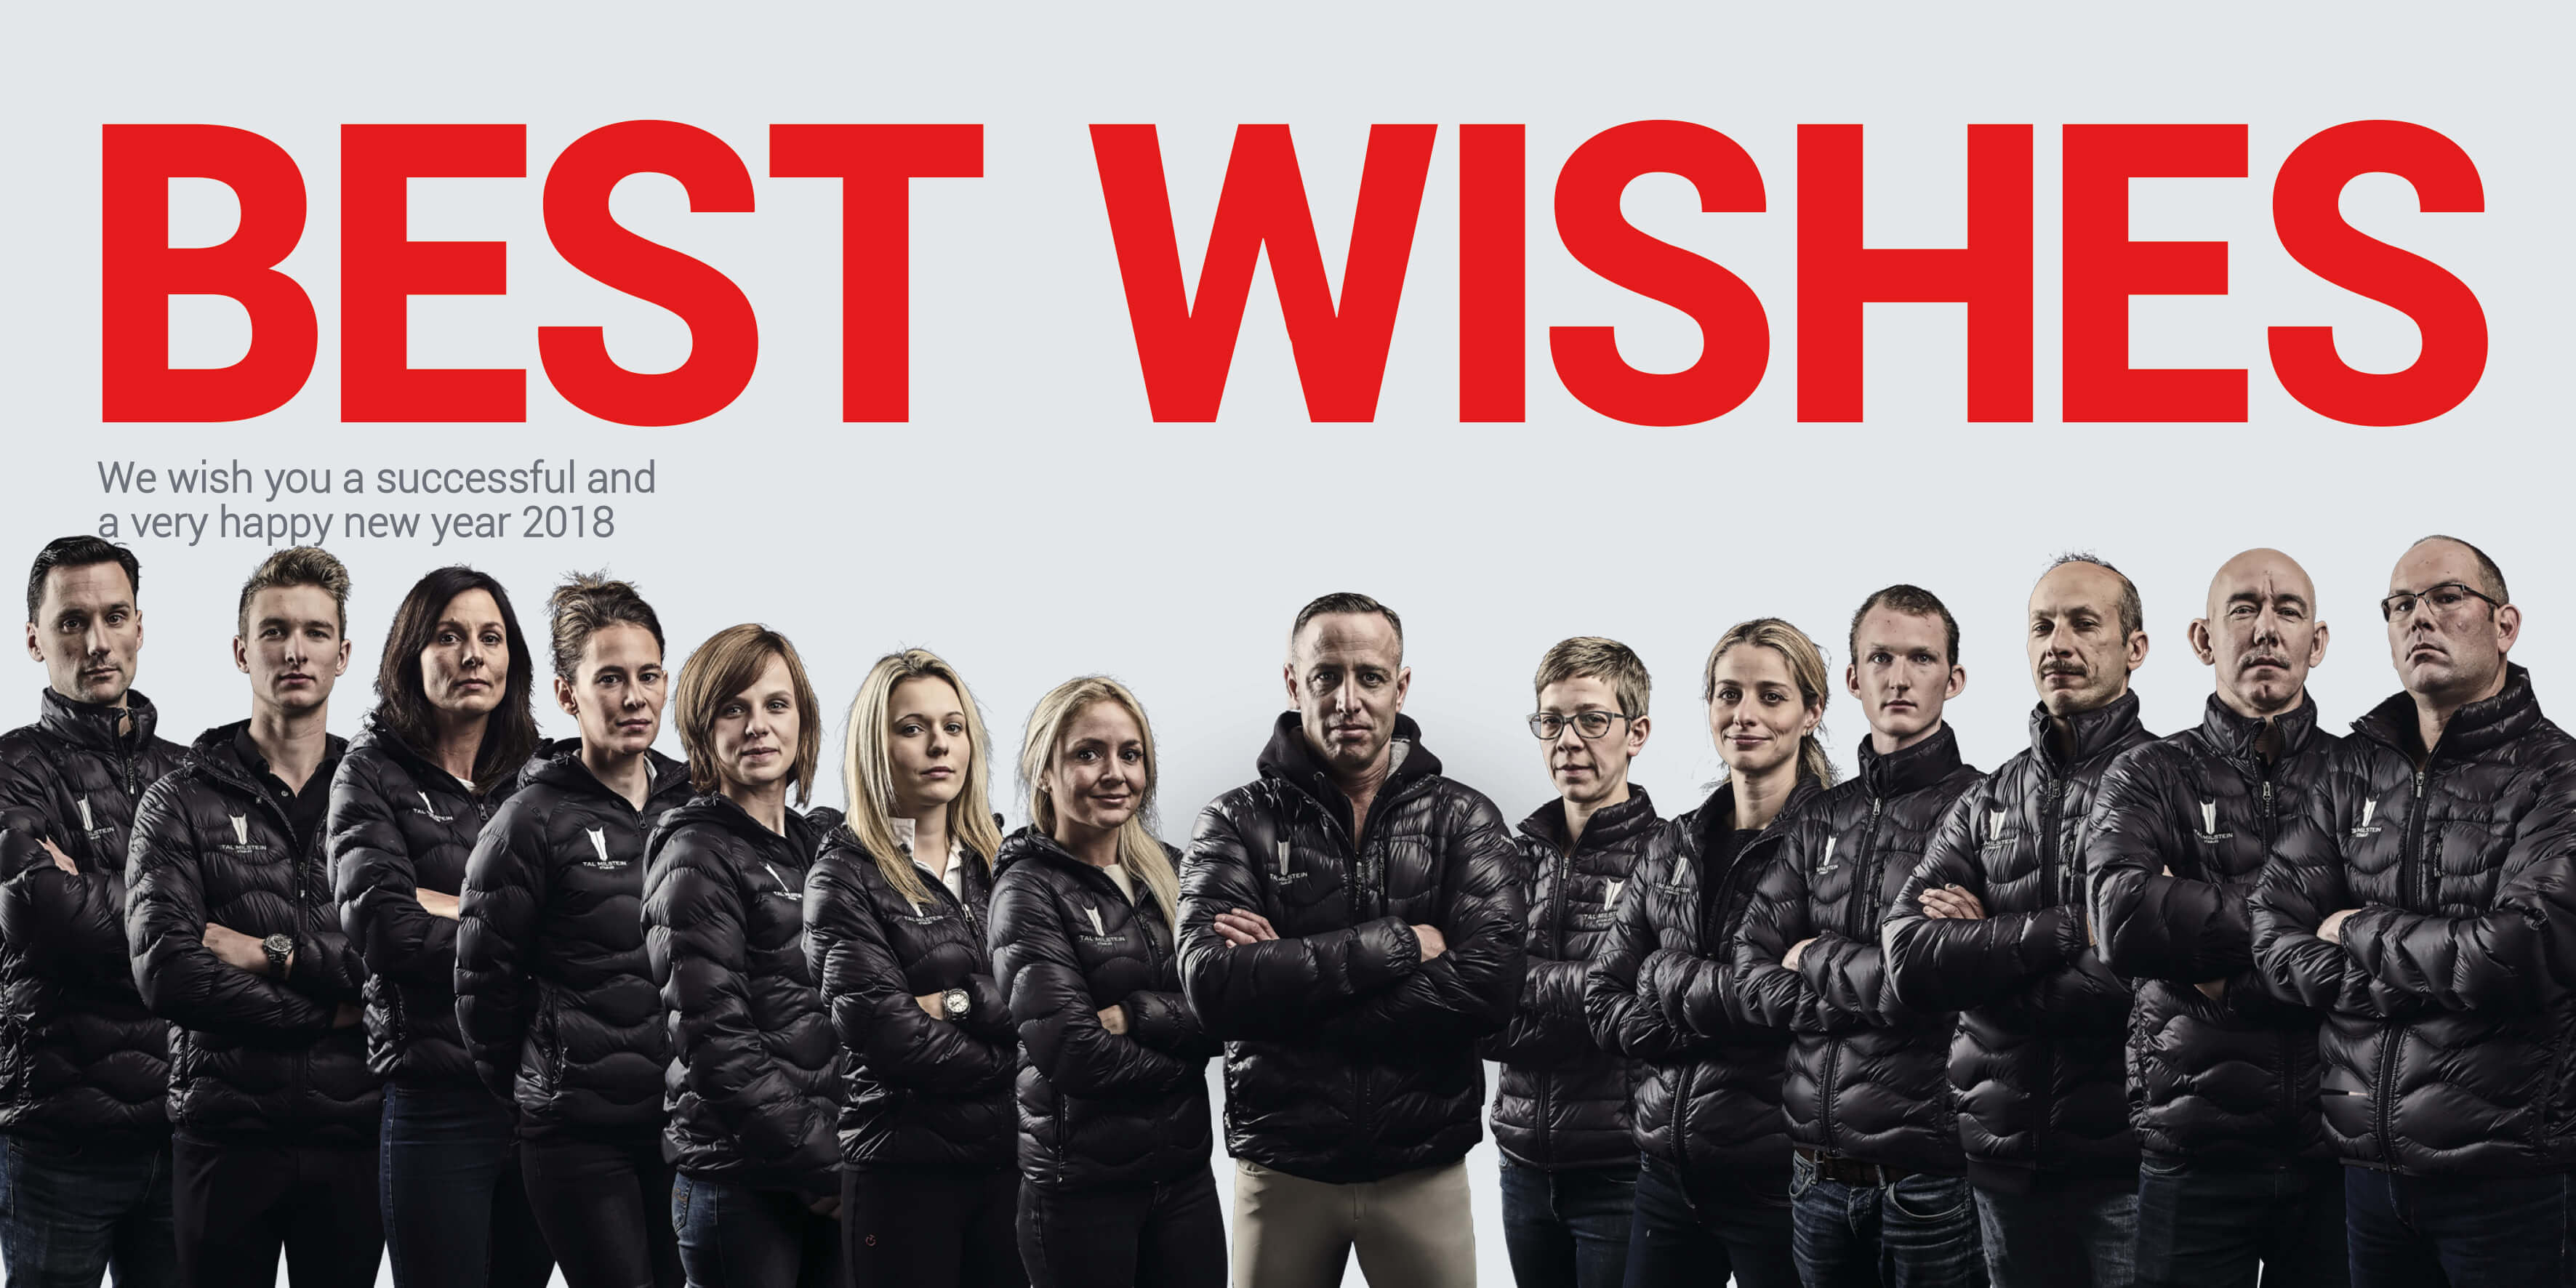 Tal Milstein Stables team wishes you a very happy New Year!